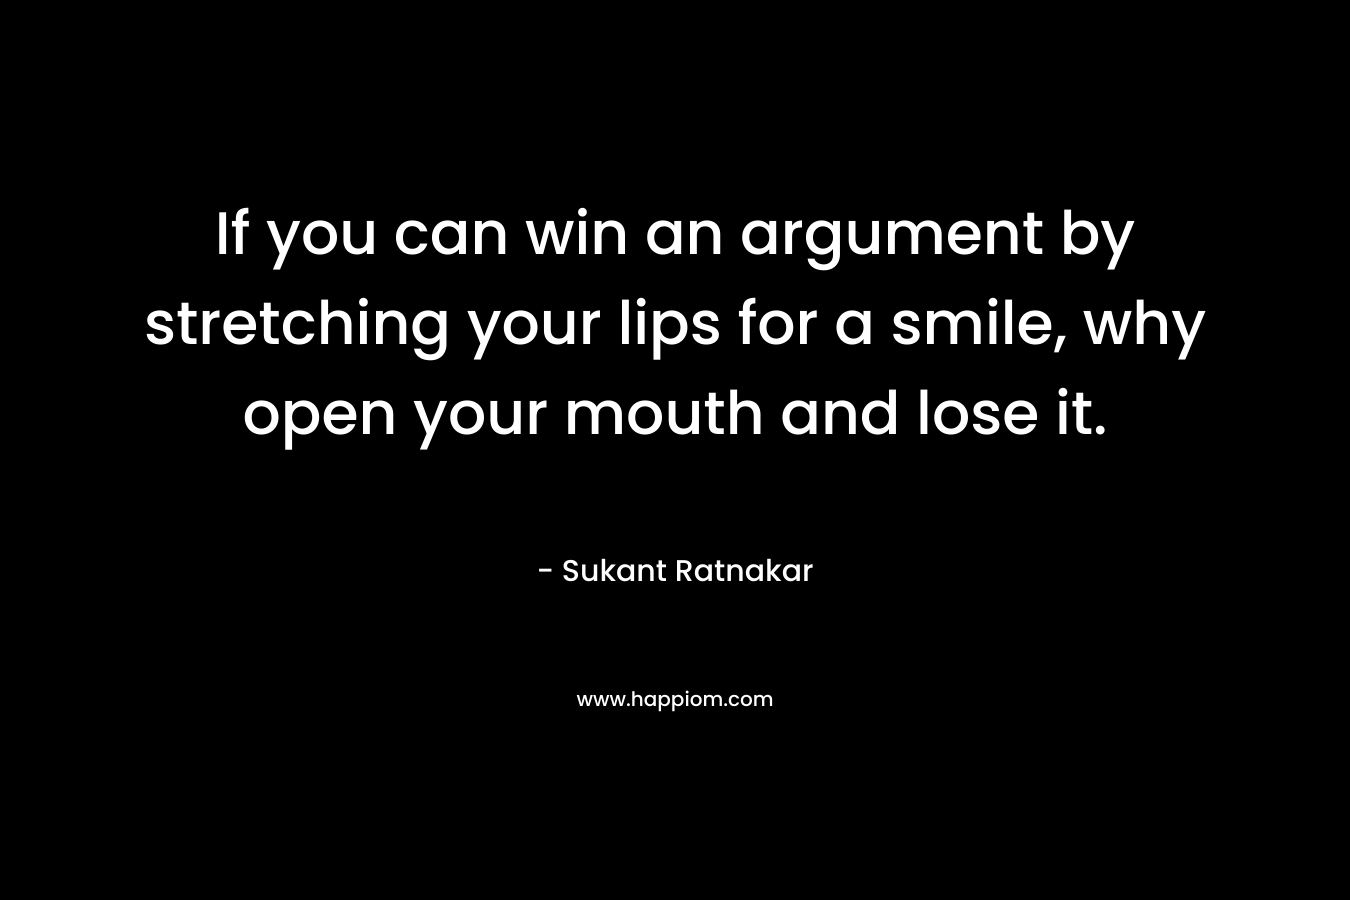 If you can win an argument by stretching your lips for a smile, why open your mouth and lose it. – Sukant Ratnakar